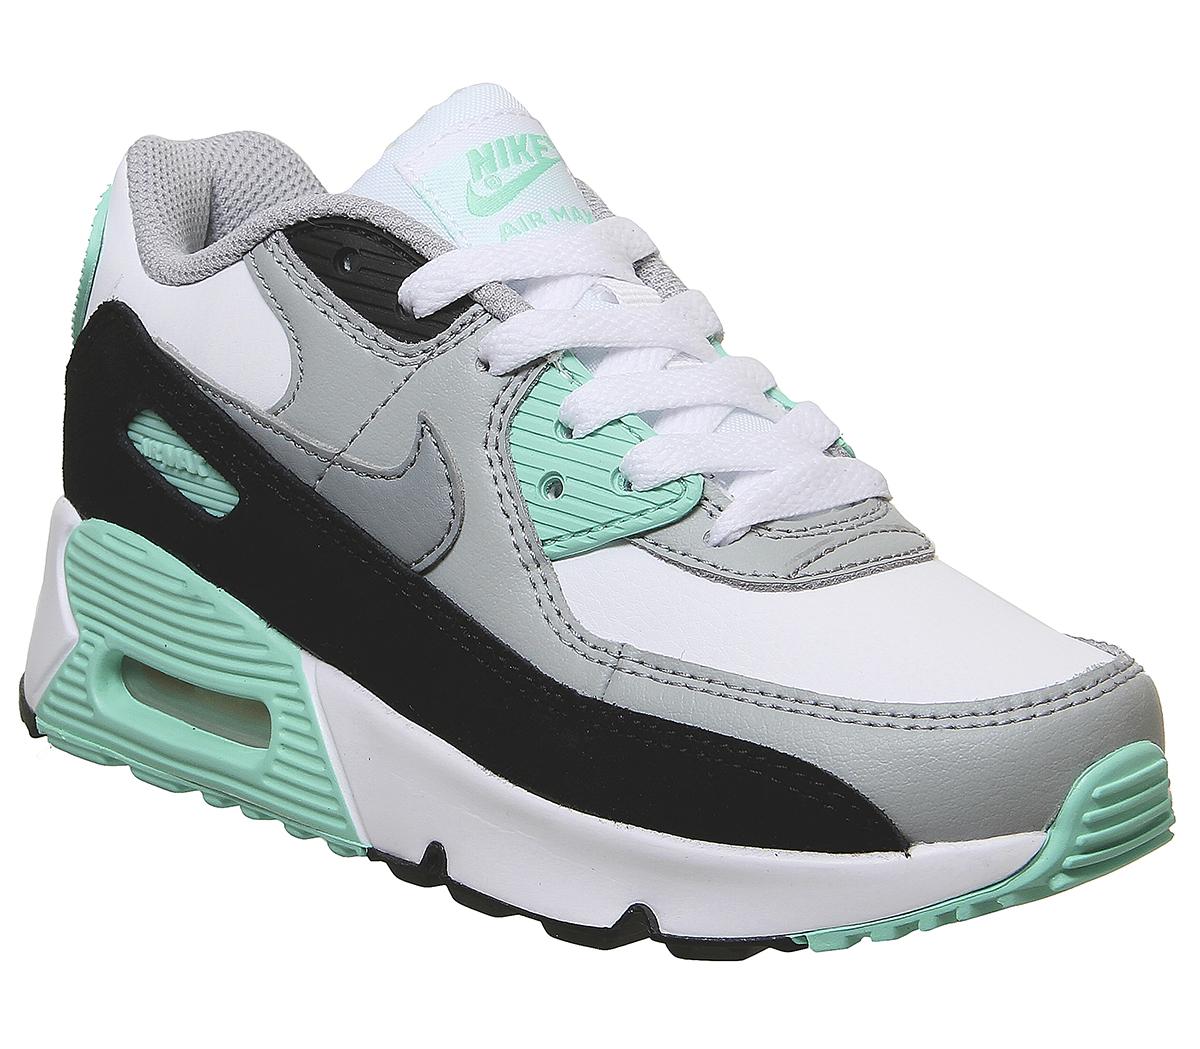 NikeAir Max 90 Ps TrainersWhite Particle Grey Smoke Grey Turquoise